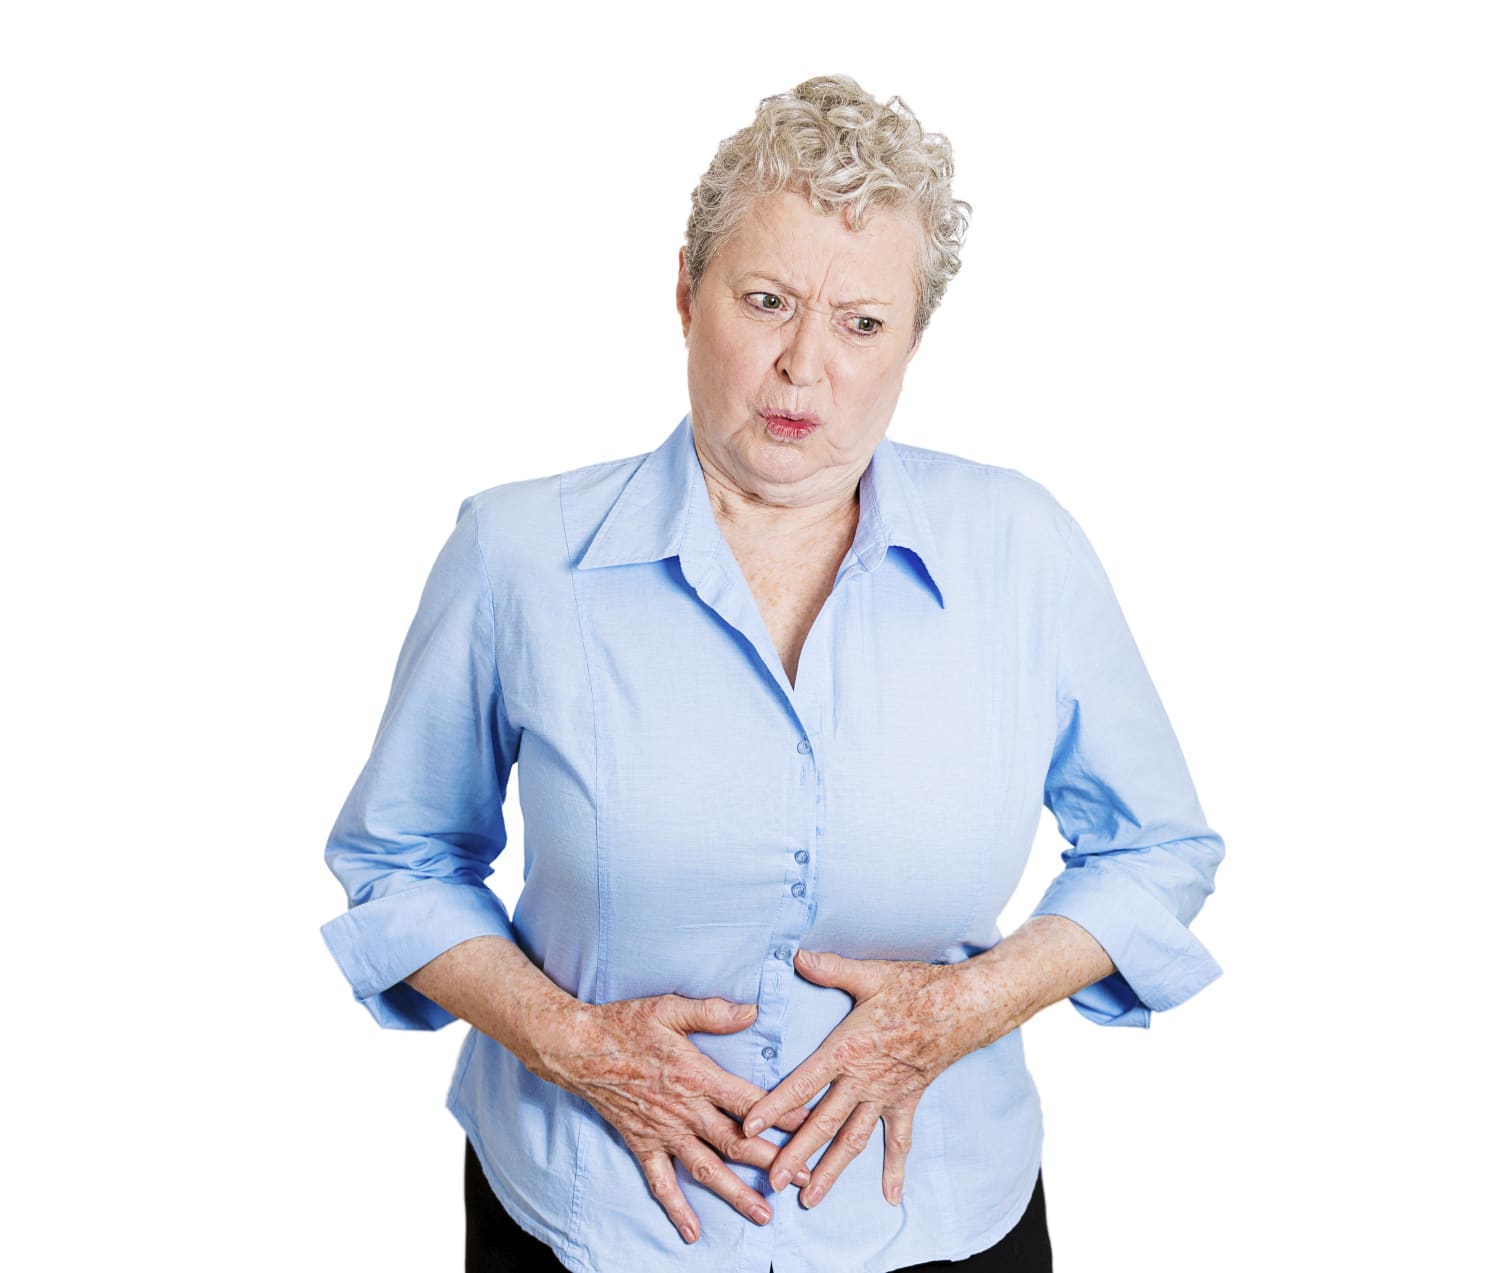 Urinary Incontinence in the Elderly